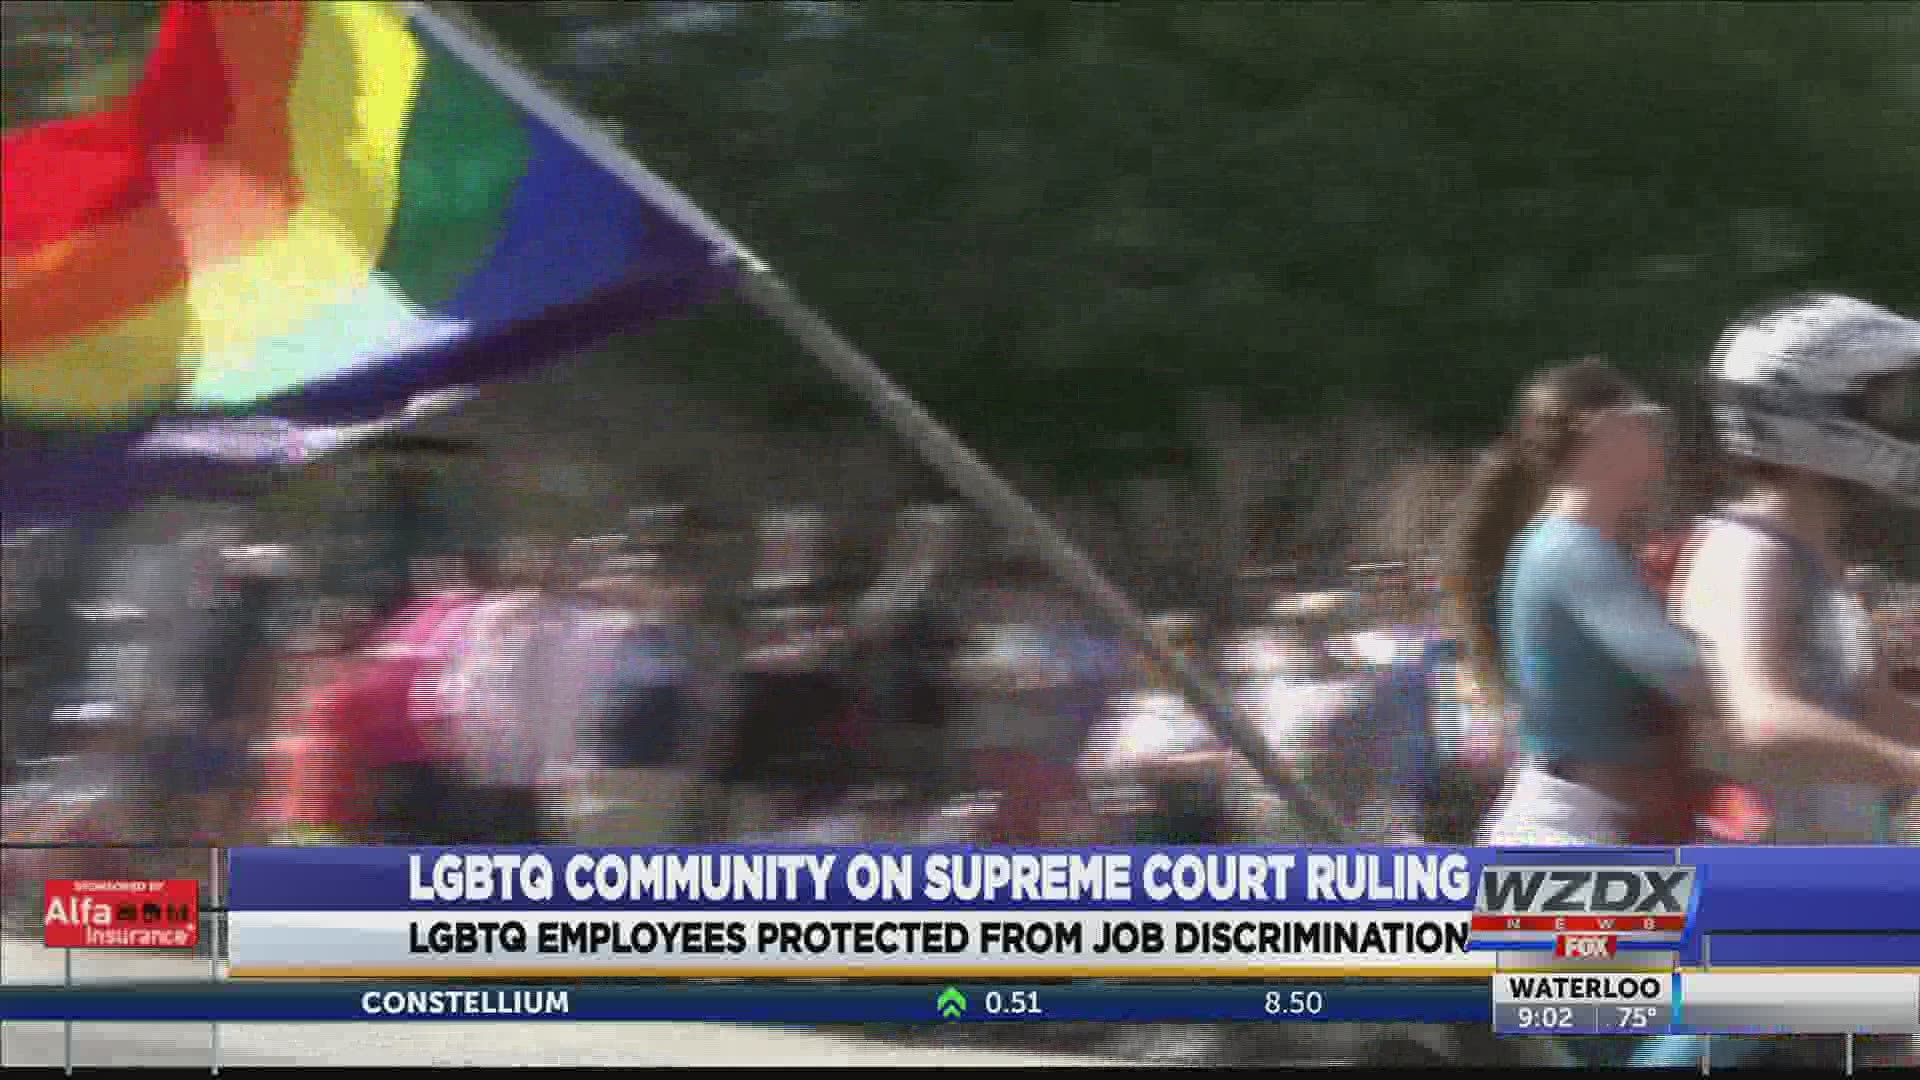 The U.S. Supreme Court made a historic ruling that protects LGBTQ employees from job discrimination.